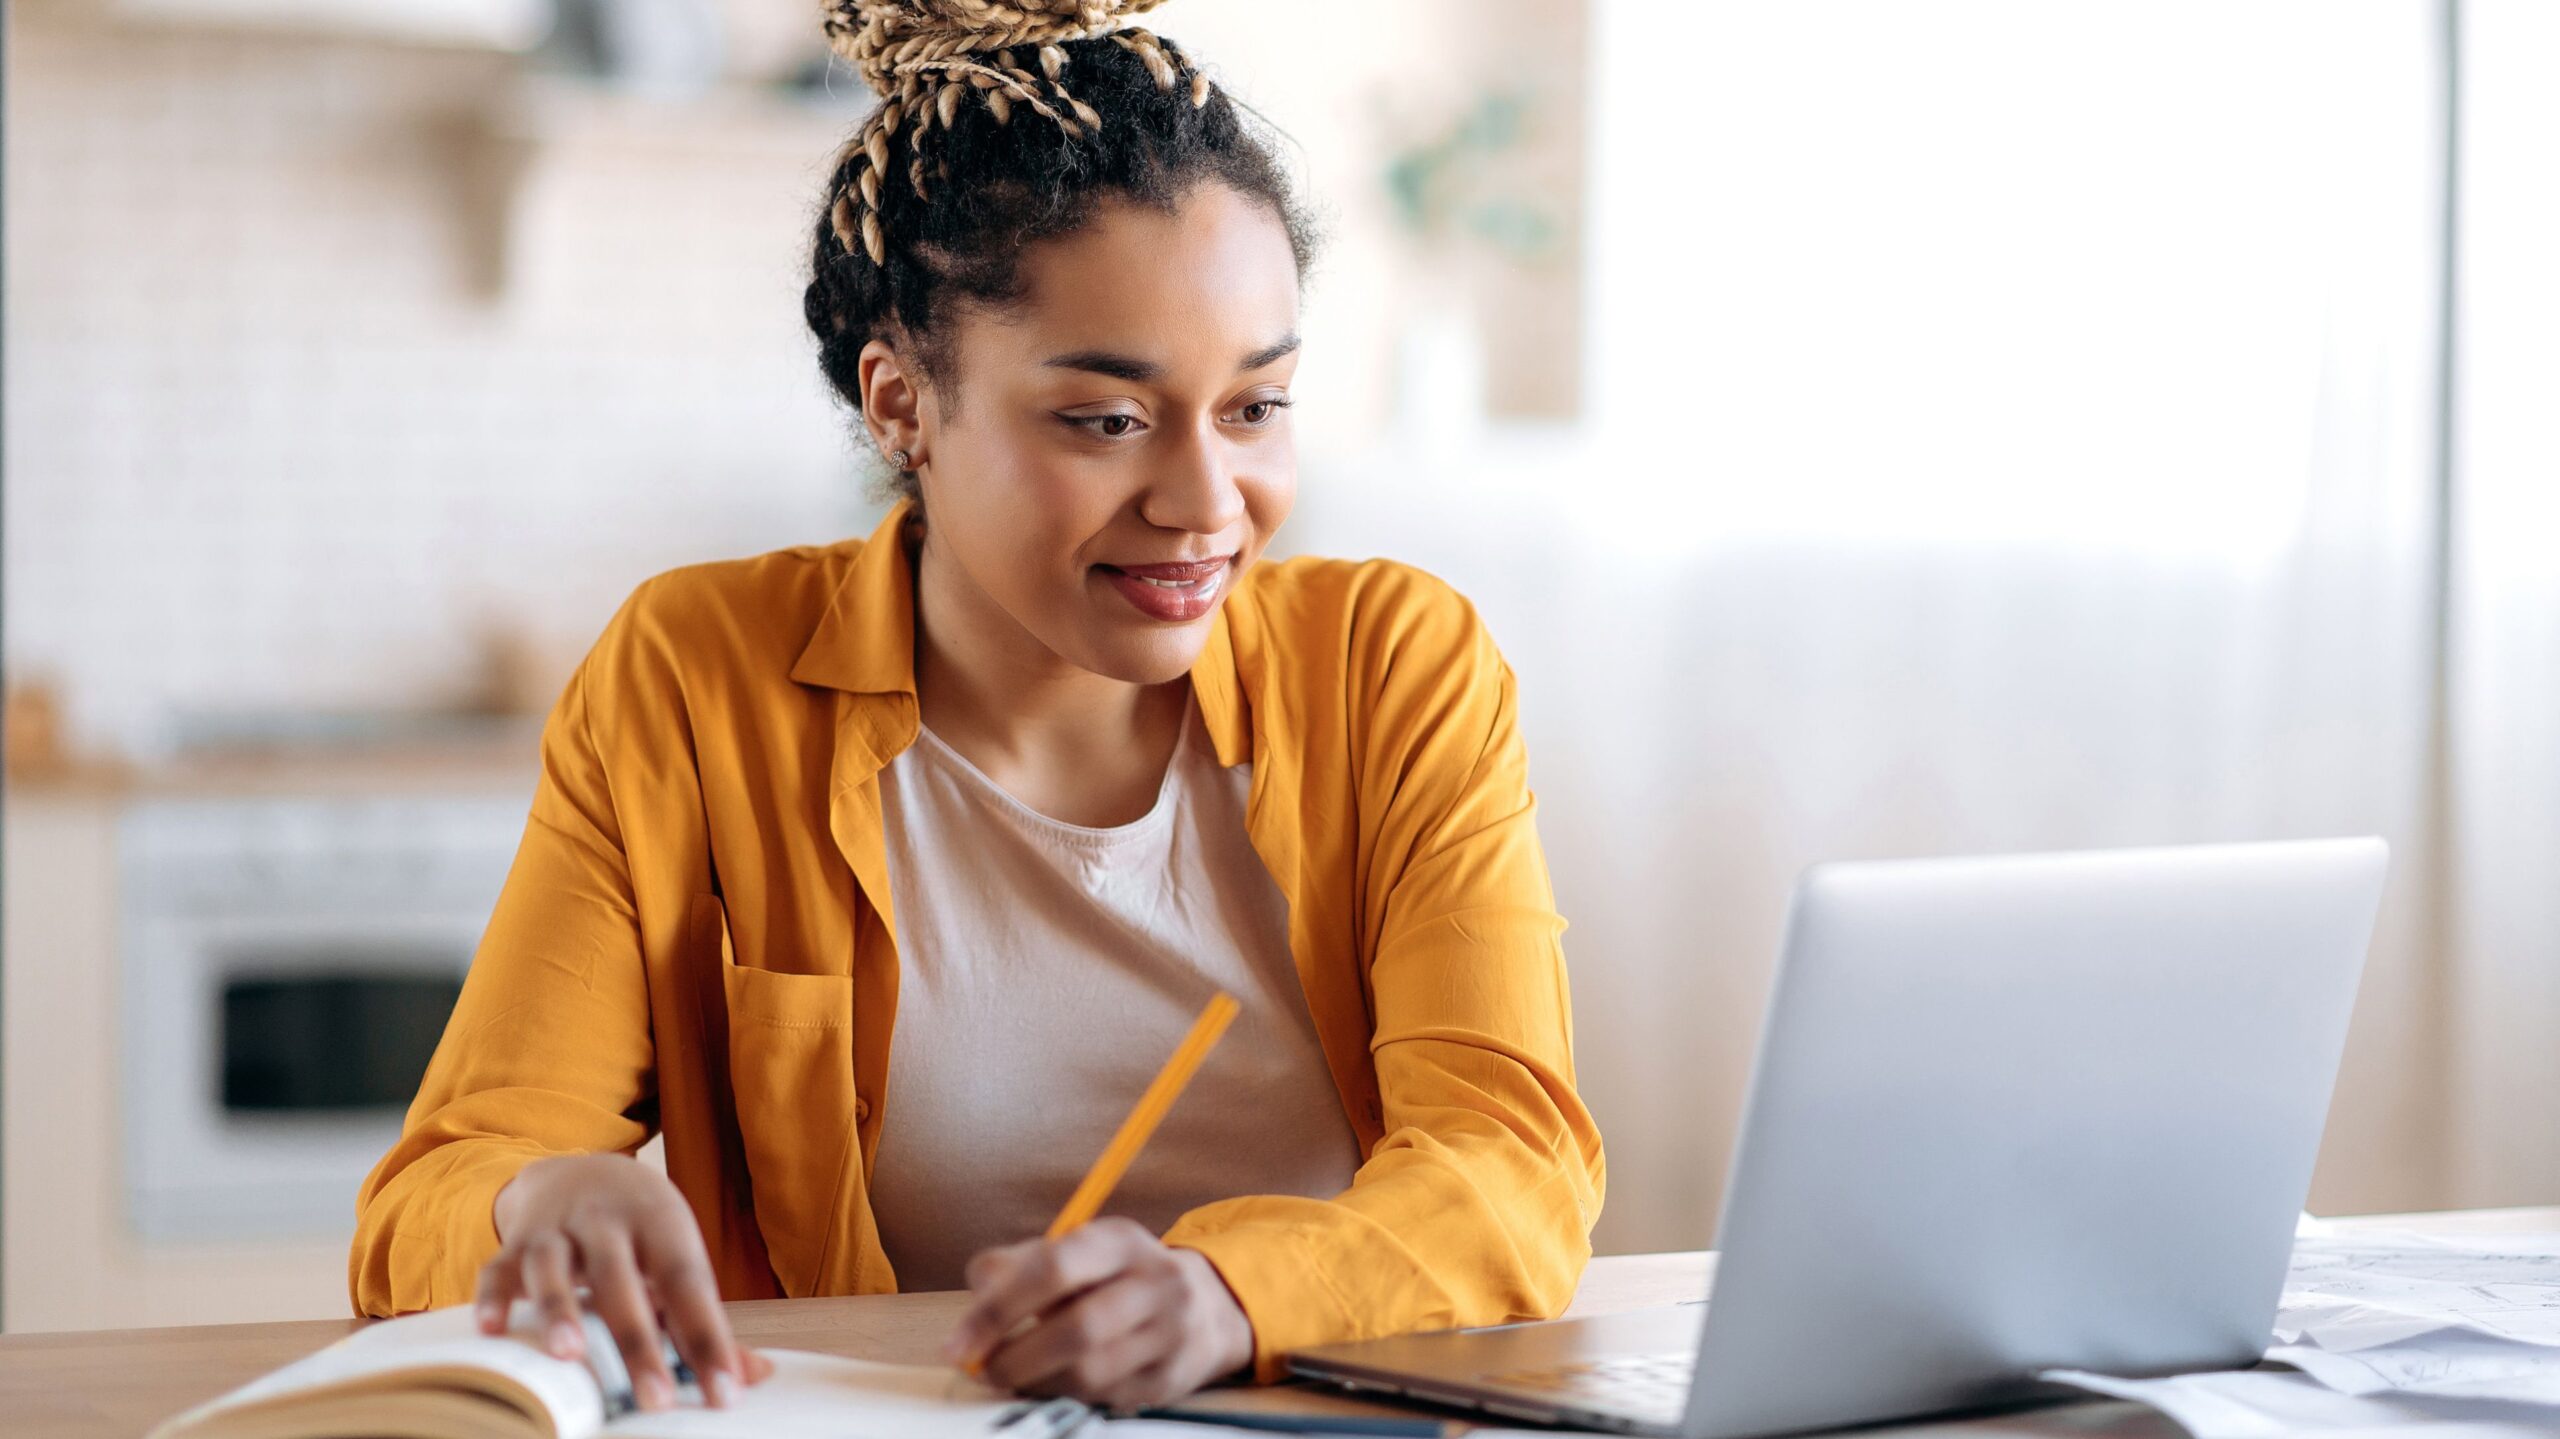 Focused African American female student with afro dreadlocks, studying remotely from home, using a laptop, taking notes on notepad during online lesson, e-learning concept, smiling